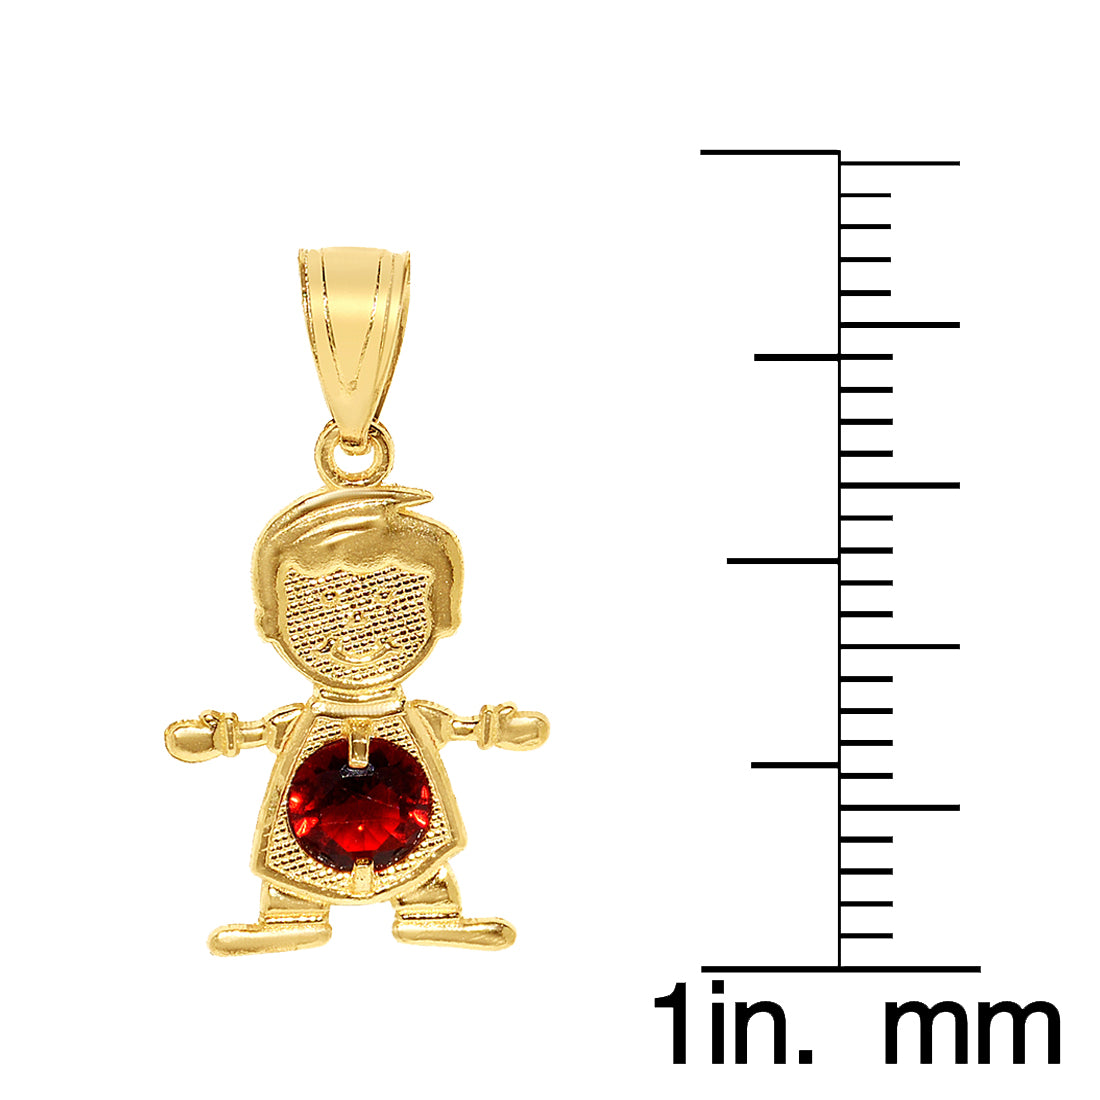 14k Yellow Gold Round-cut Cubic Zirconia June Birthstone Boy/Son Pendant with Square Wheat Chain